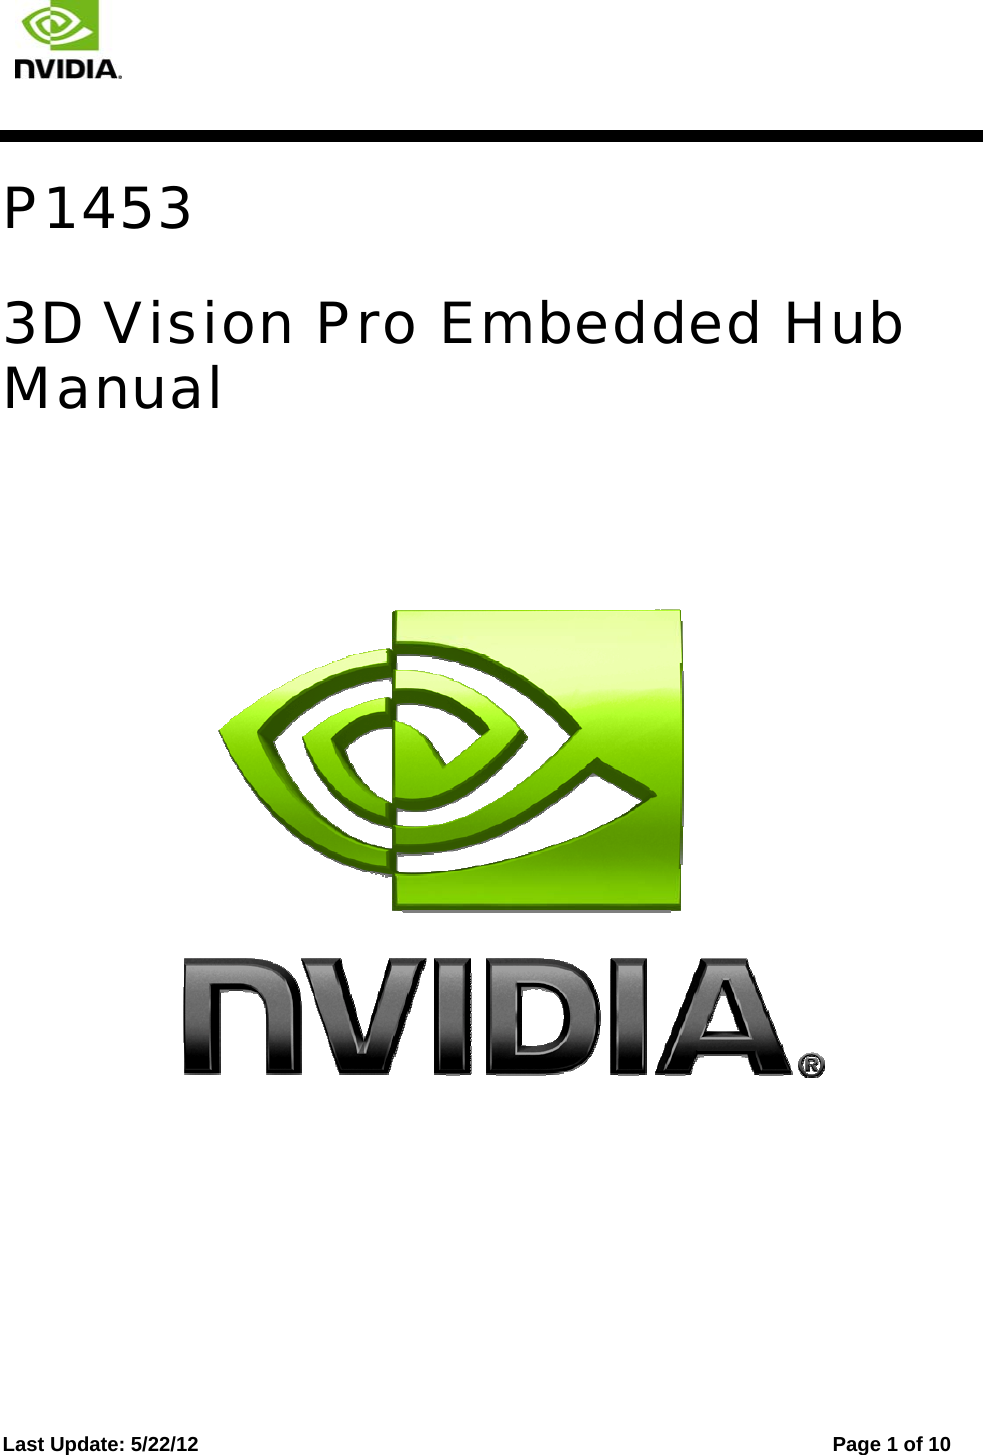   Last Update: 5/22/12      Page 1 of 10  P1453 3D Vision Pro Embedded Hub Manual     